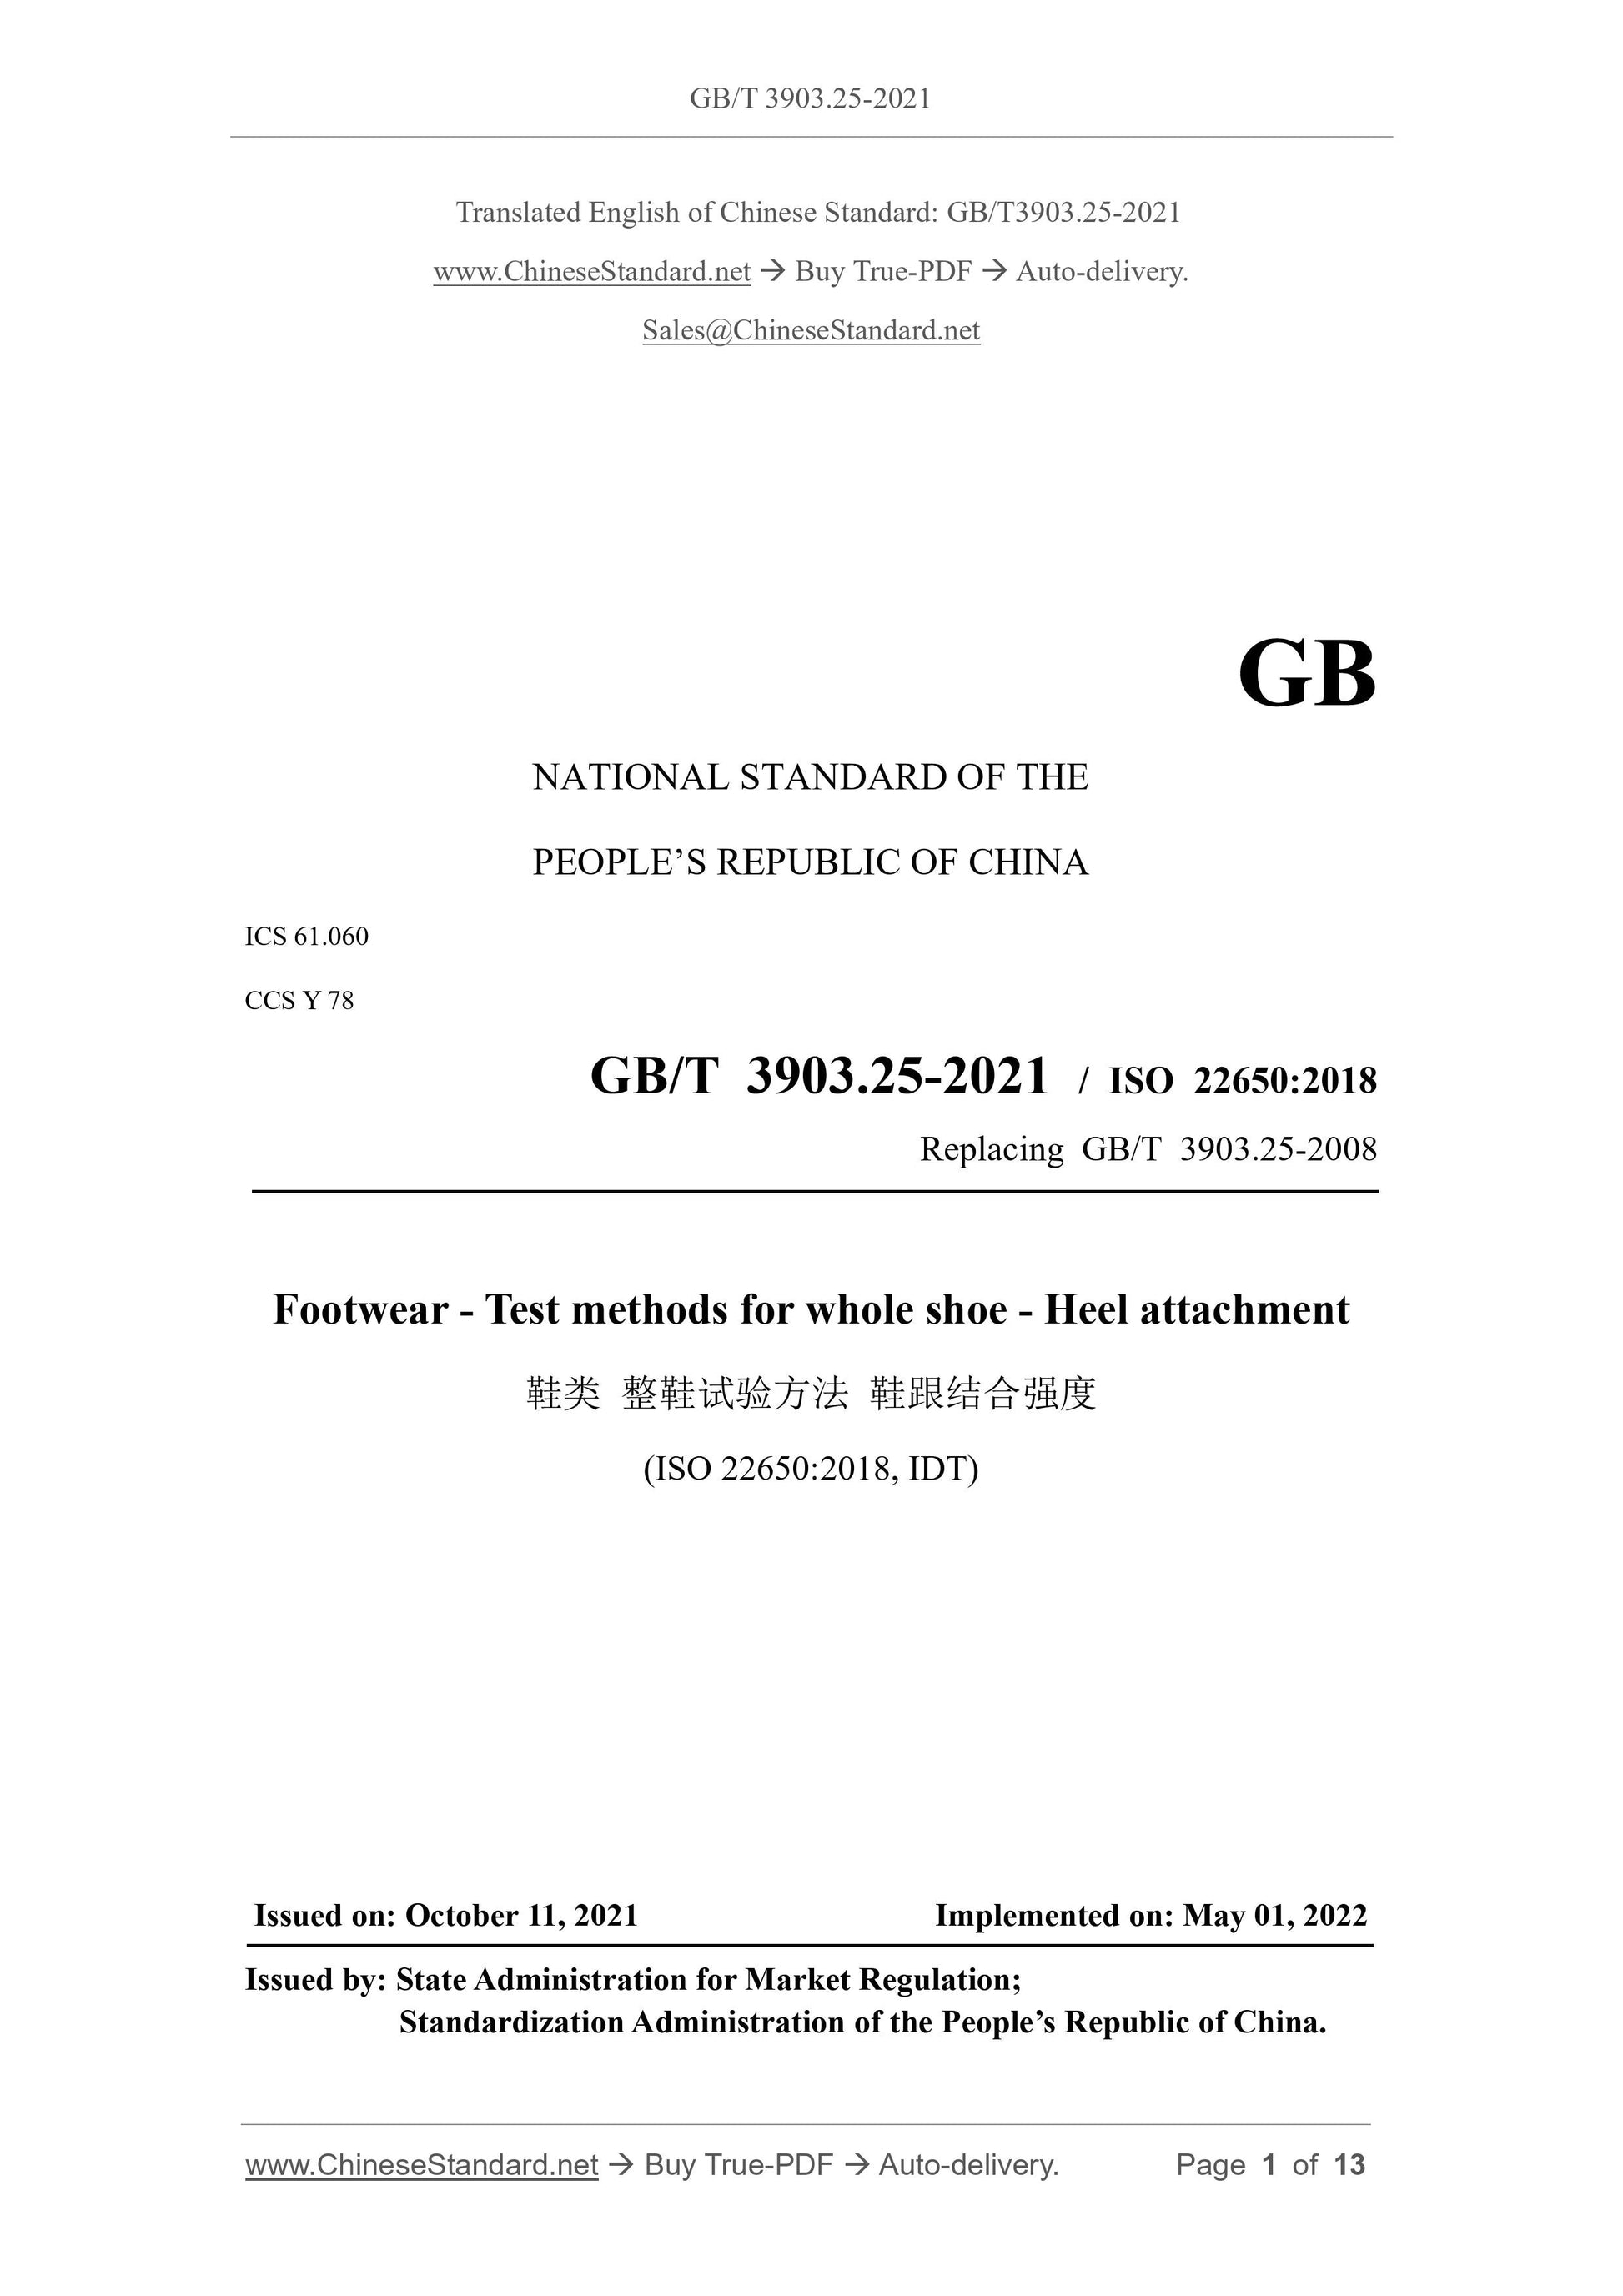 GB/T 3903.25-2021 Page 1